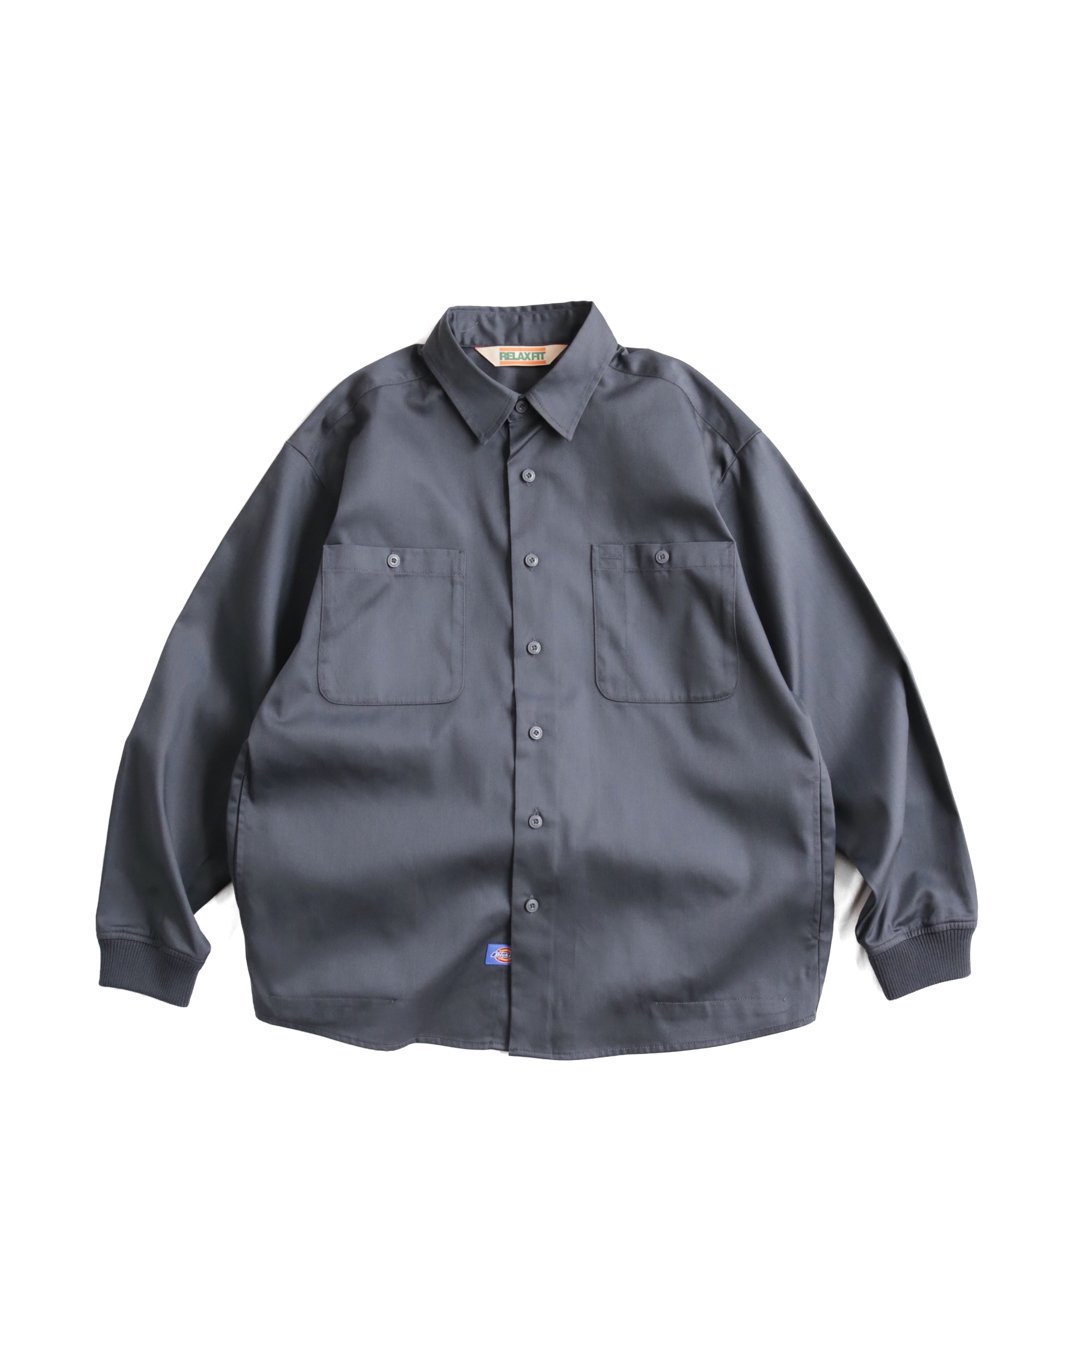 RELAXFIT  DICKIES WORKSHIRTS - Charcoal